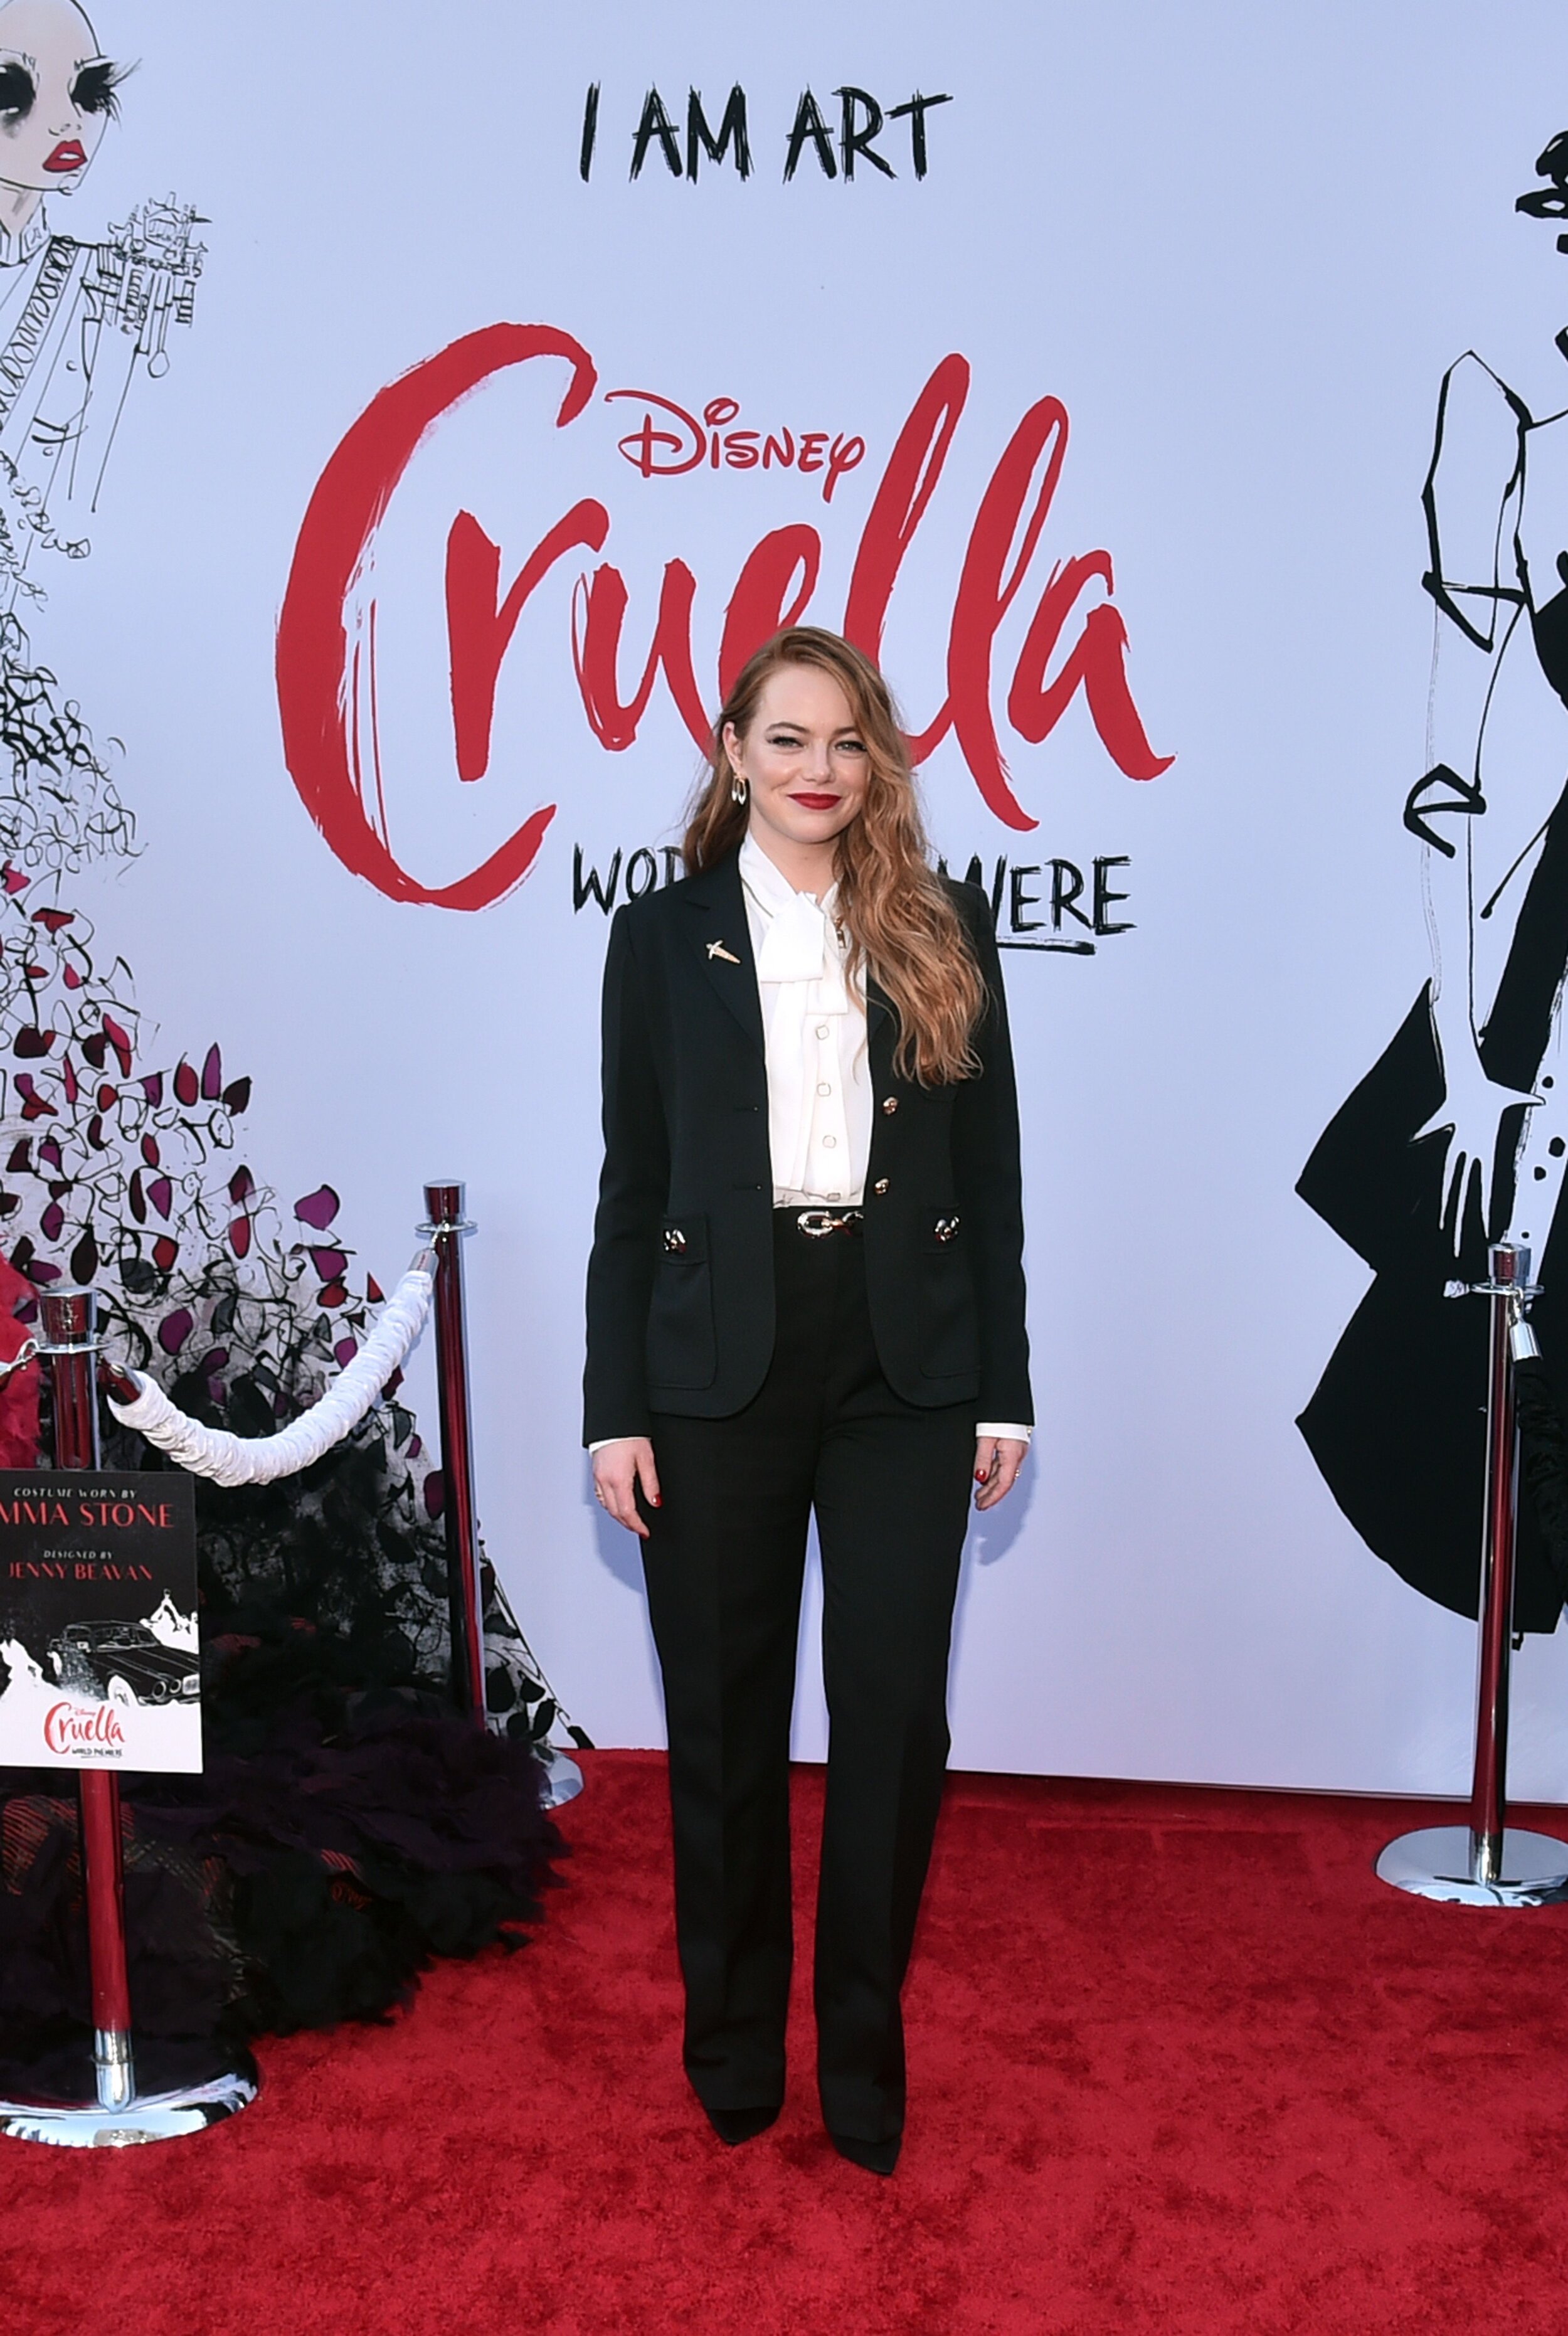 best of emma stone on X: Emma Stone attends the Los Angeles premiere of  Disney's #Cruella at El Capitan Theatre on May 18, 2021 in Los Angeles,  California.  / X